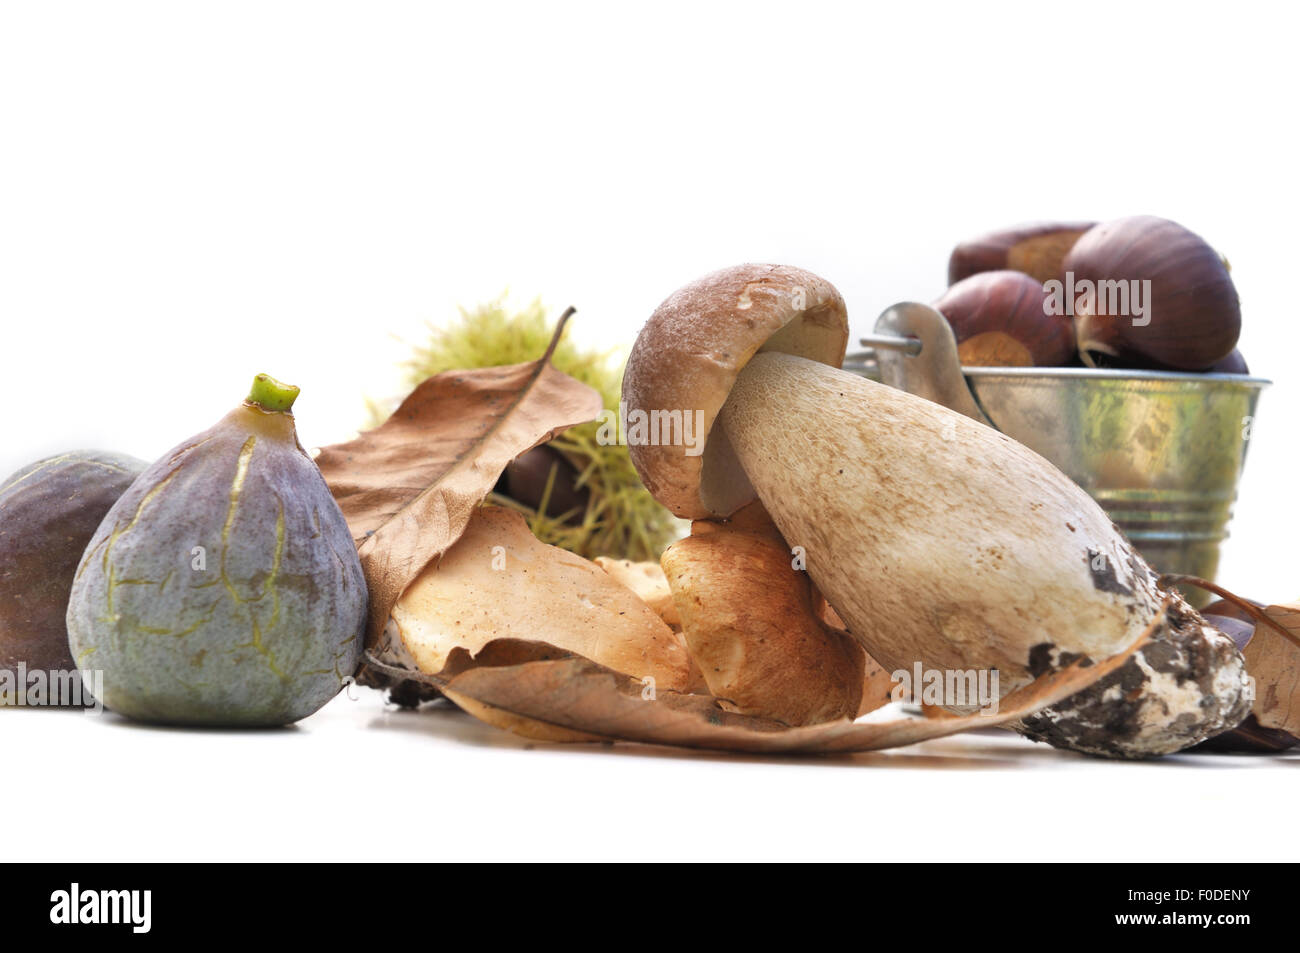 figs,chestnuts and mushrooms on white background Stock Photo